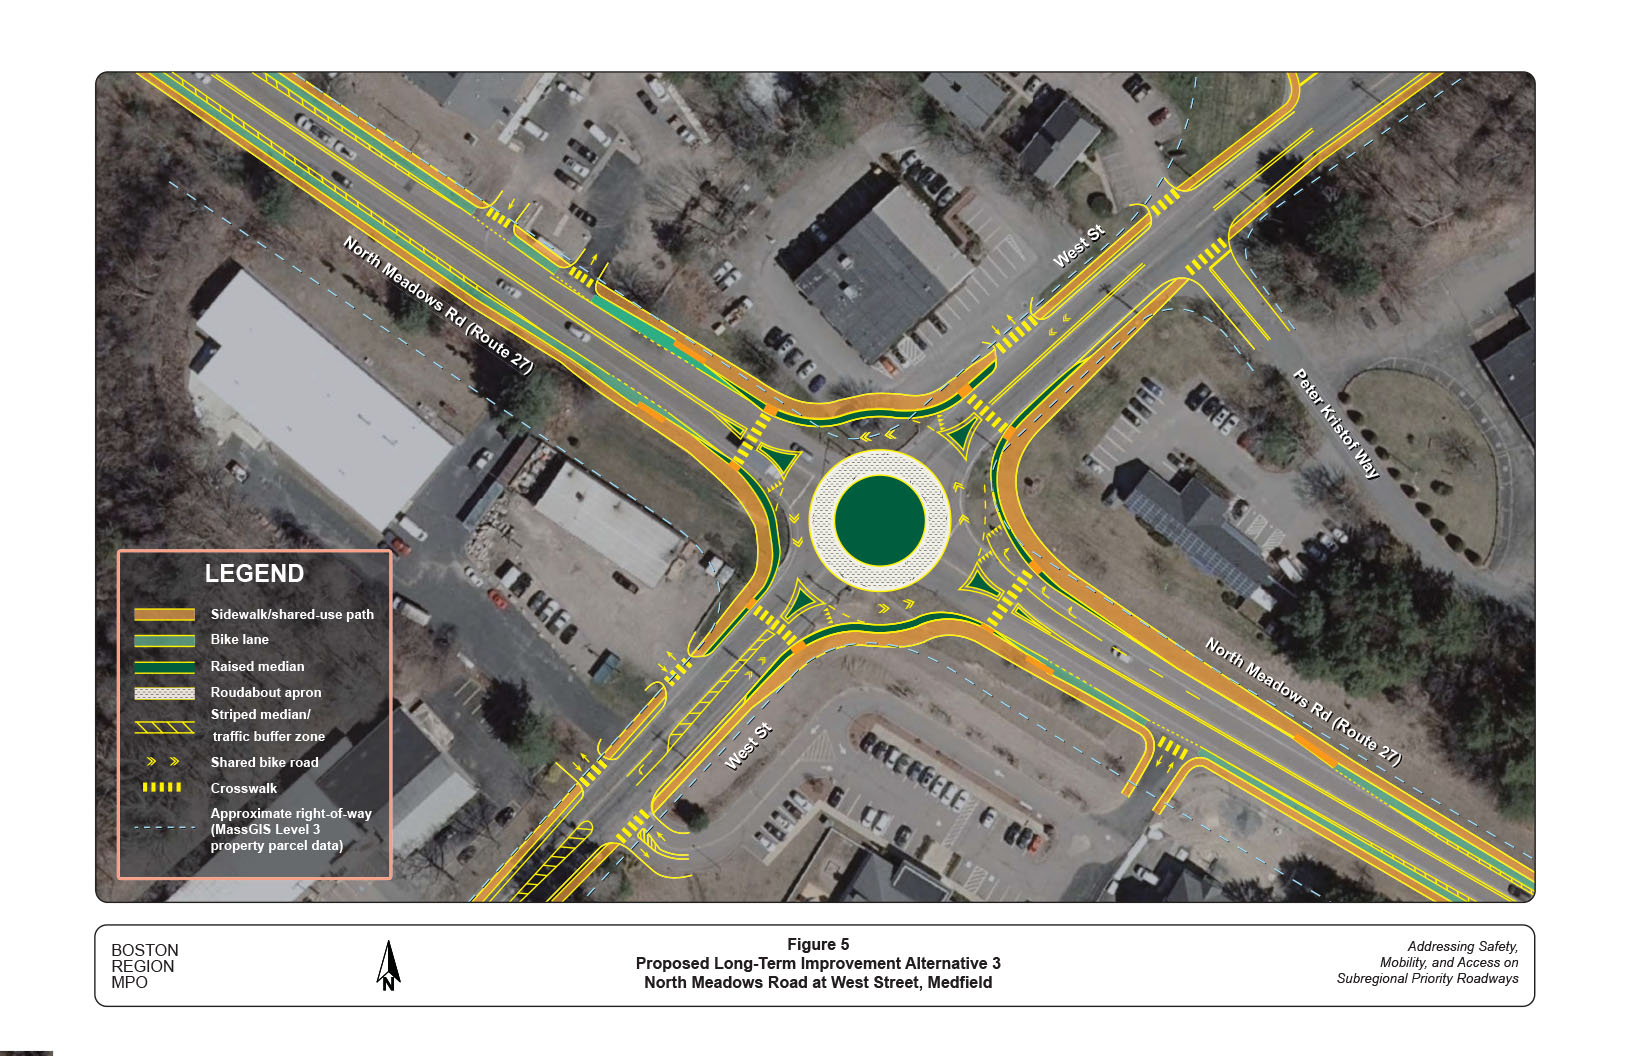 Figure 5: Proposed Long-Term Improvement Alternative 3
This figure shows a conceptual plan view of the proposed intersection modifications in Alternative 3.
